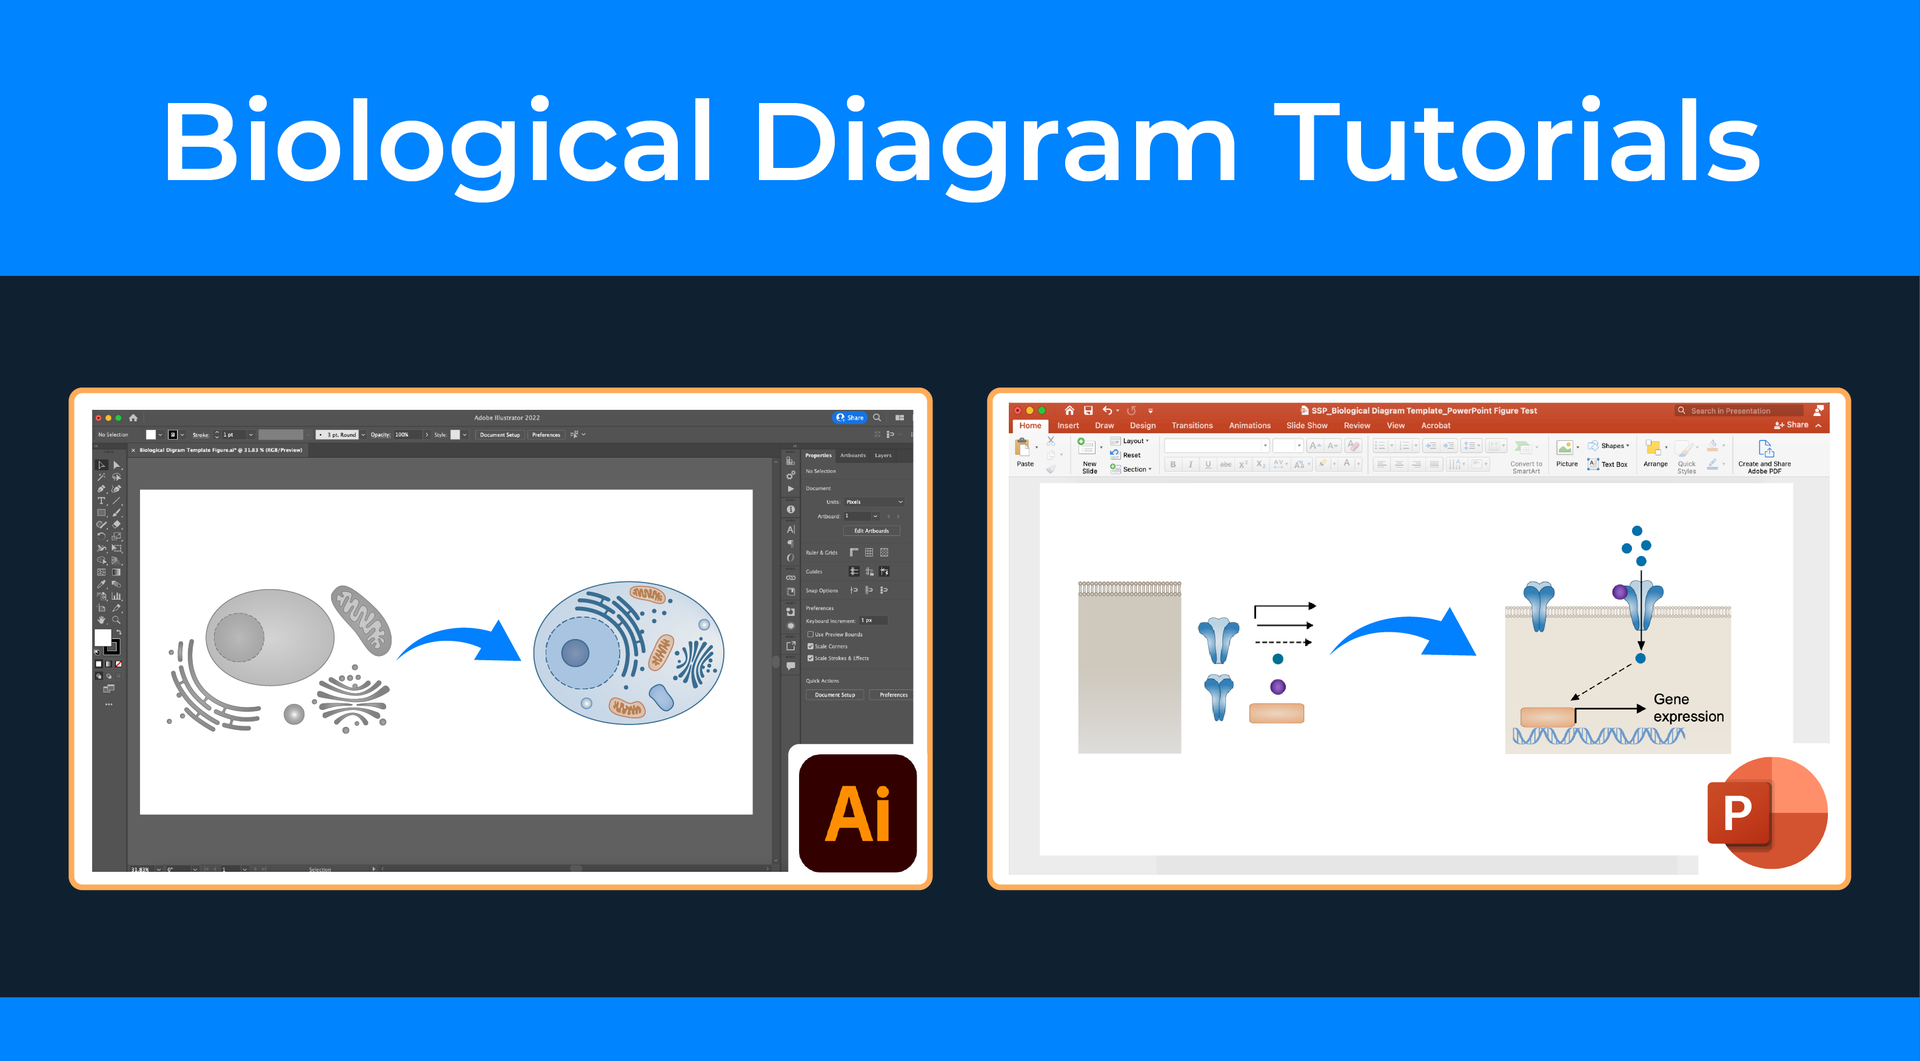 Biological Diagram Tutorial Examples for Adobe Illustrator and PowerPoint